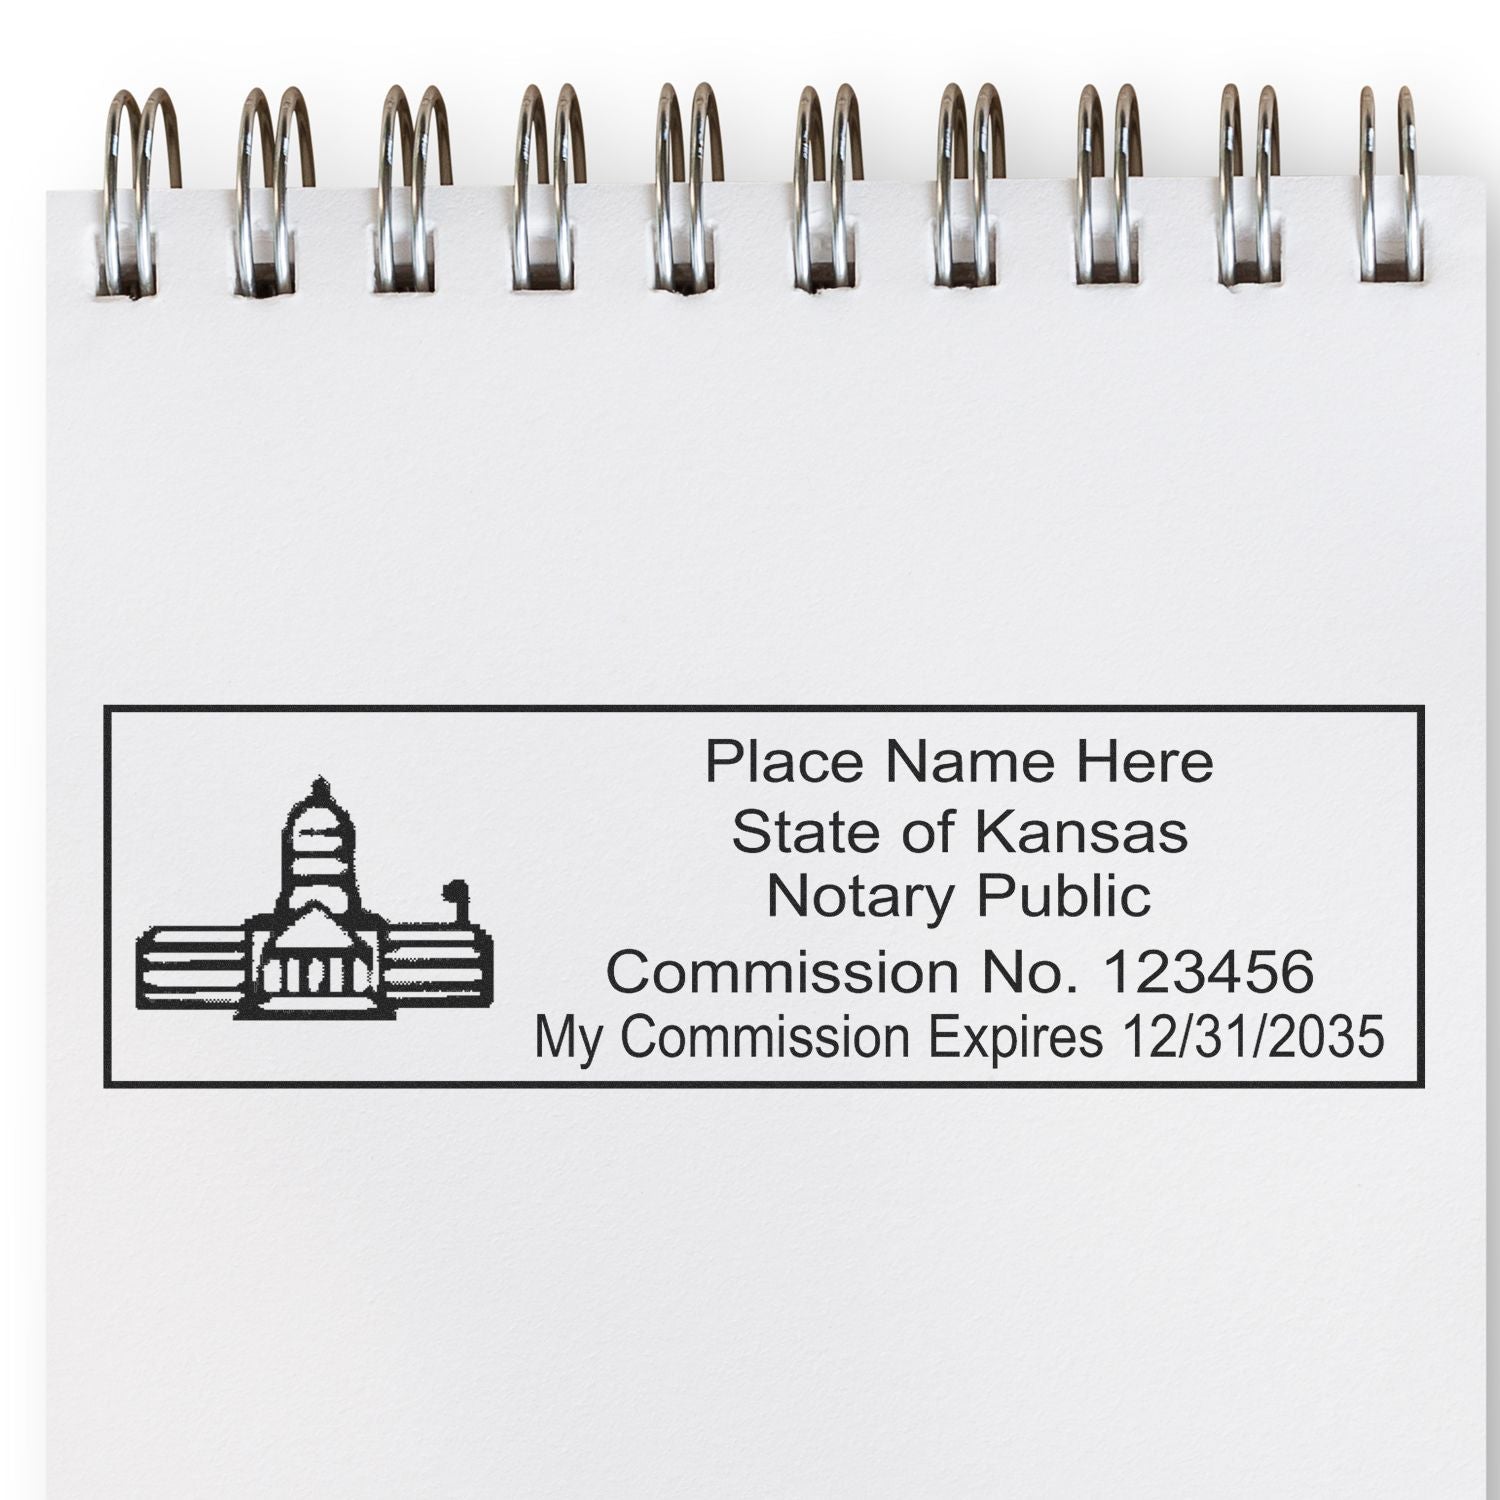 The main image for the MaxLight Premium Pre-Inked Kansas State Seal Notarial Stamp depicting a sample of the imprint and electronic files